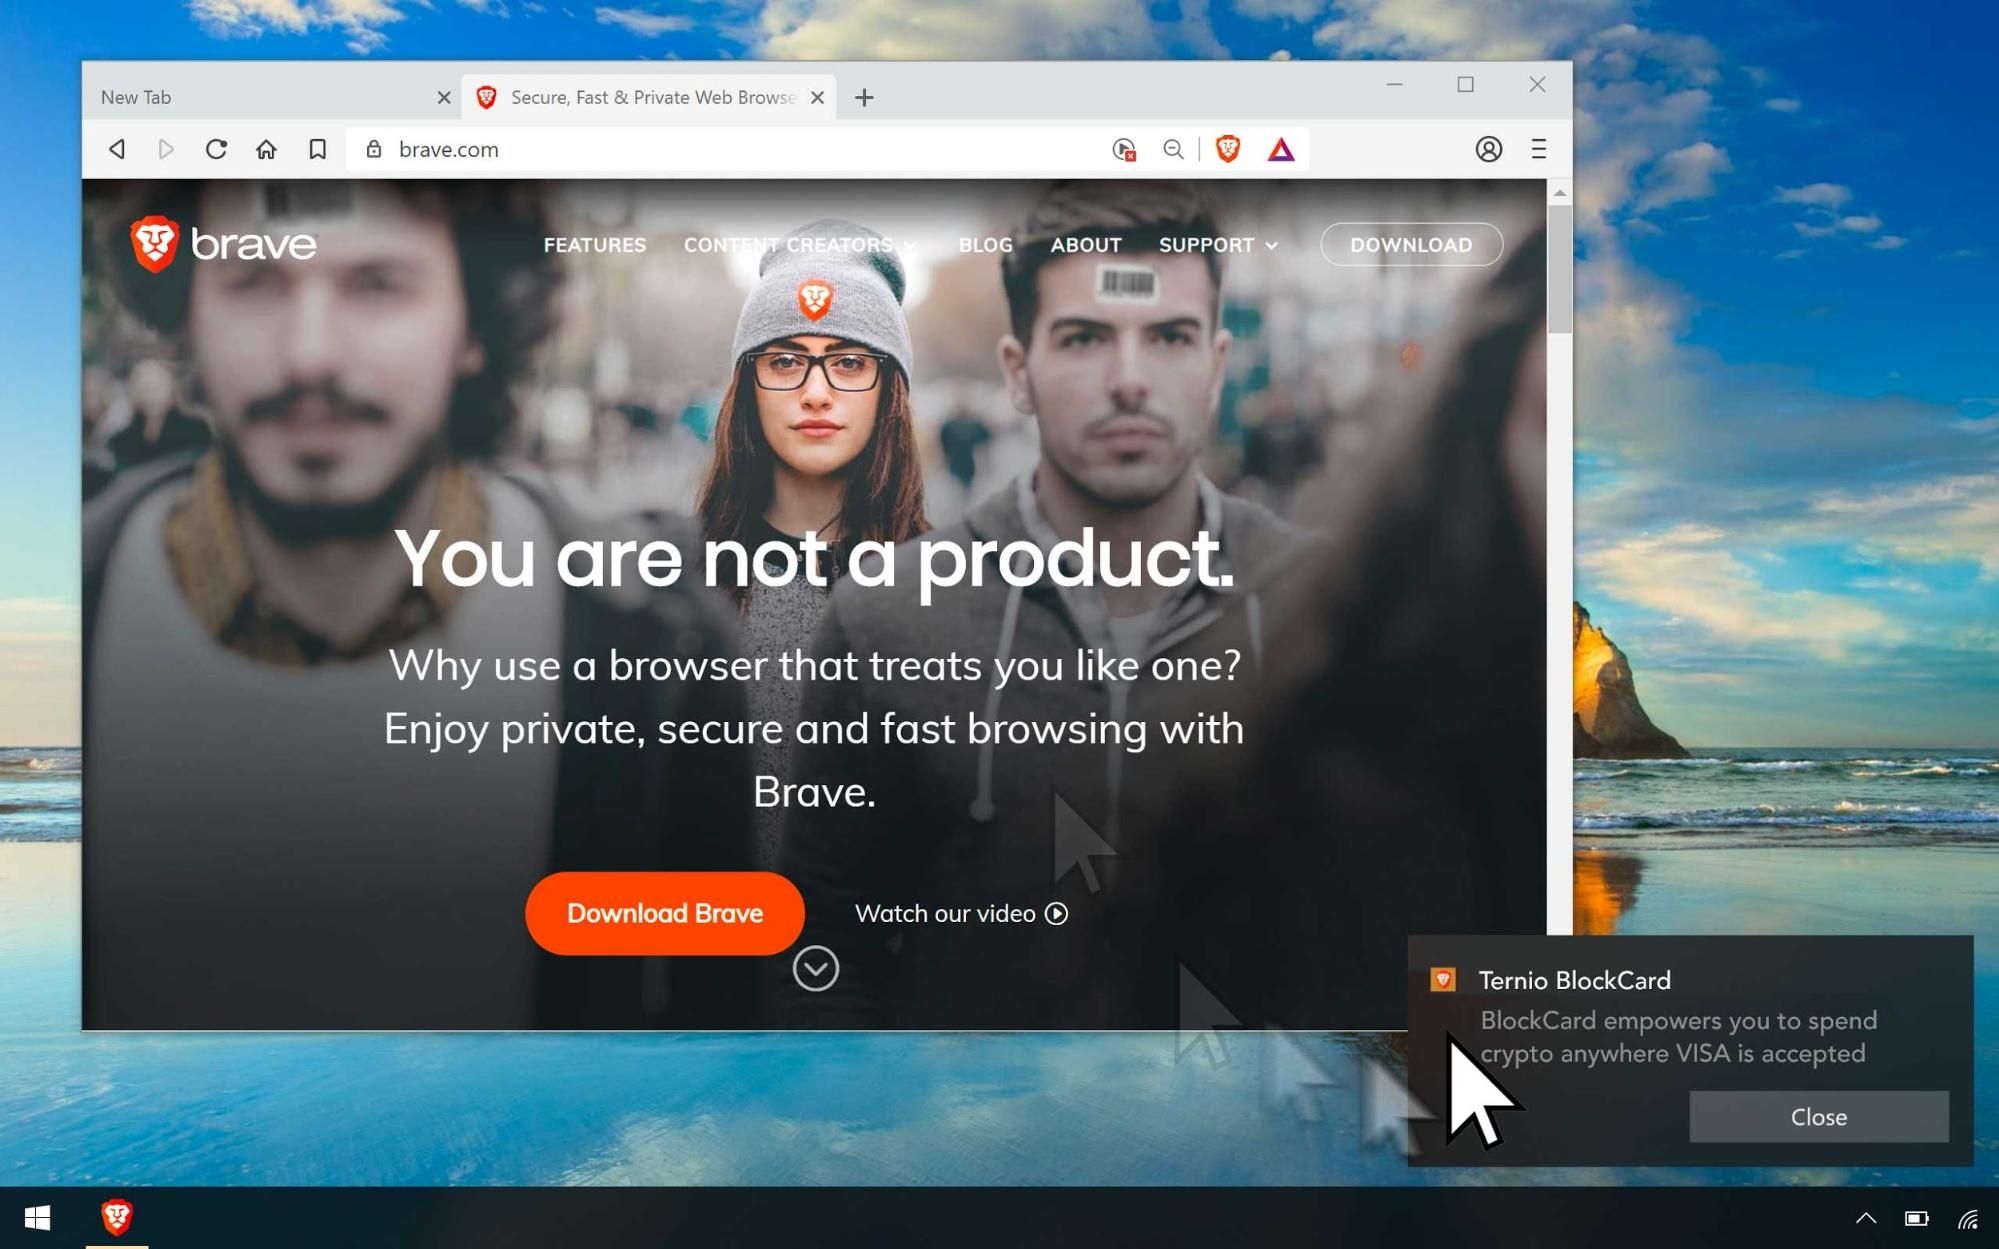 Brave browser image emphasizing privacy.